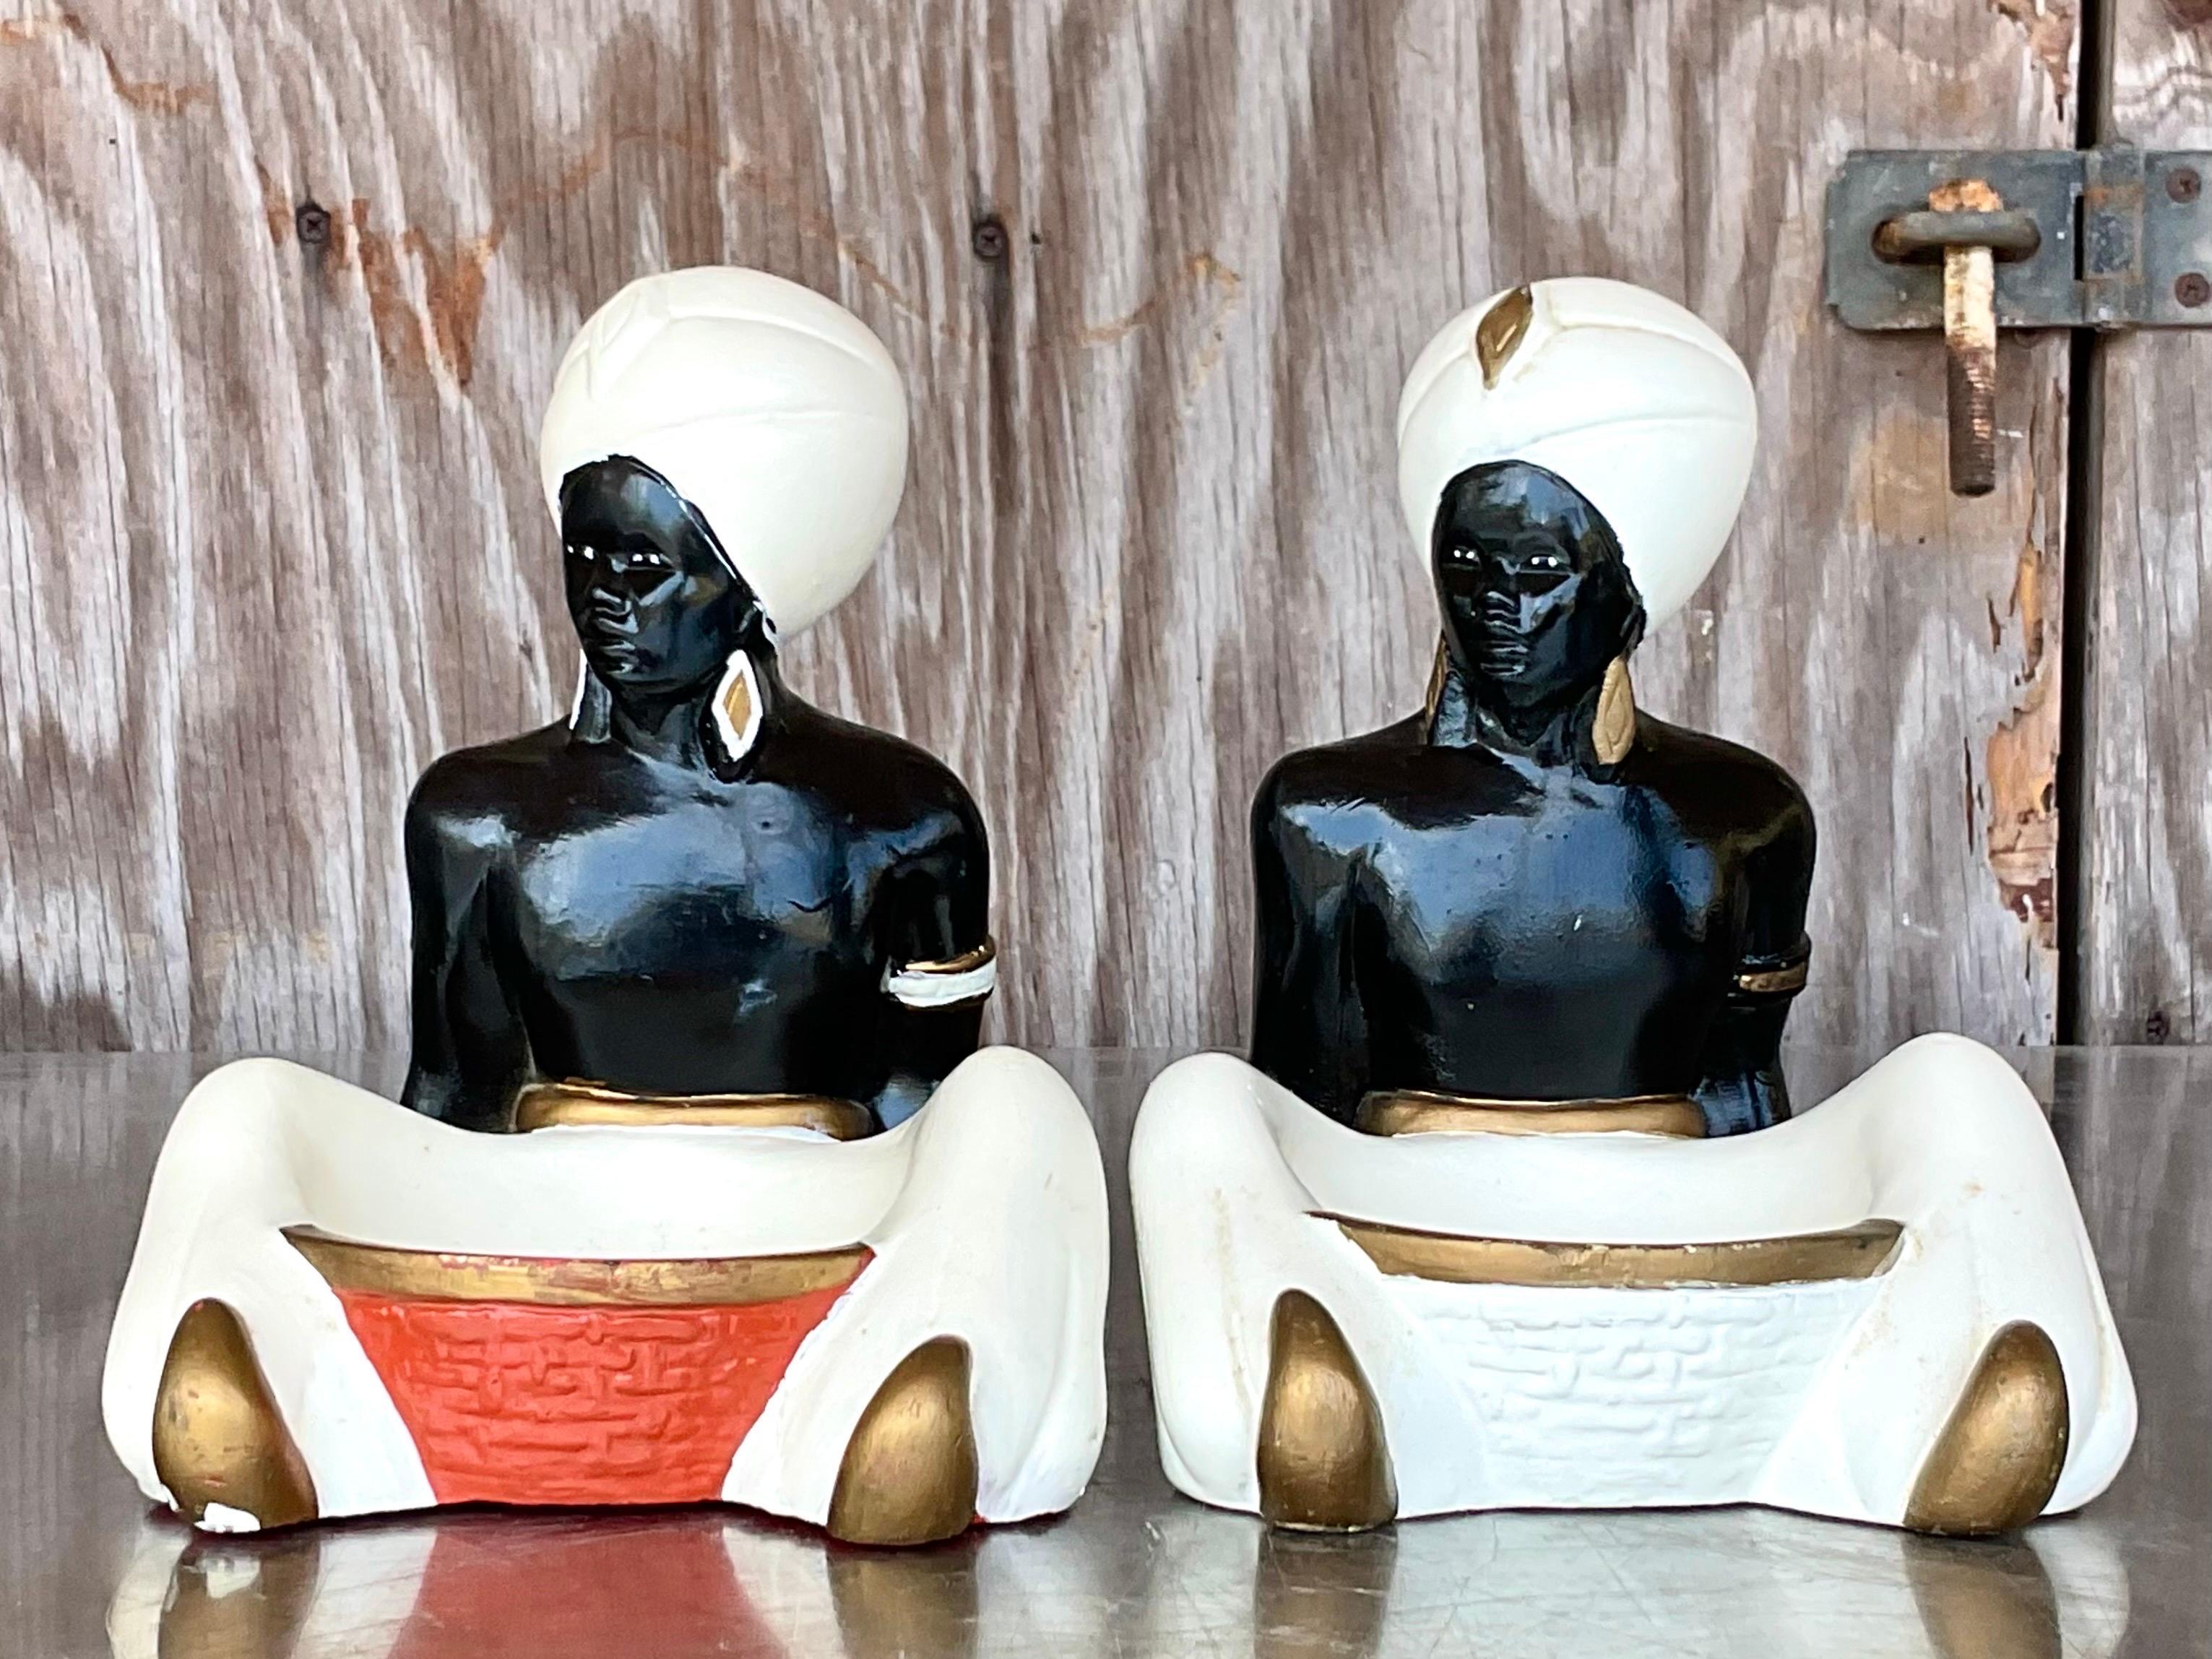 A beautiful pair of white and orange figurines that add a pop of color to any room. Acquired at a Palm Beach estate.